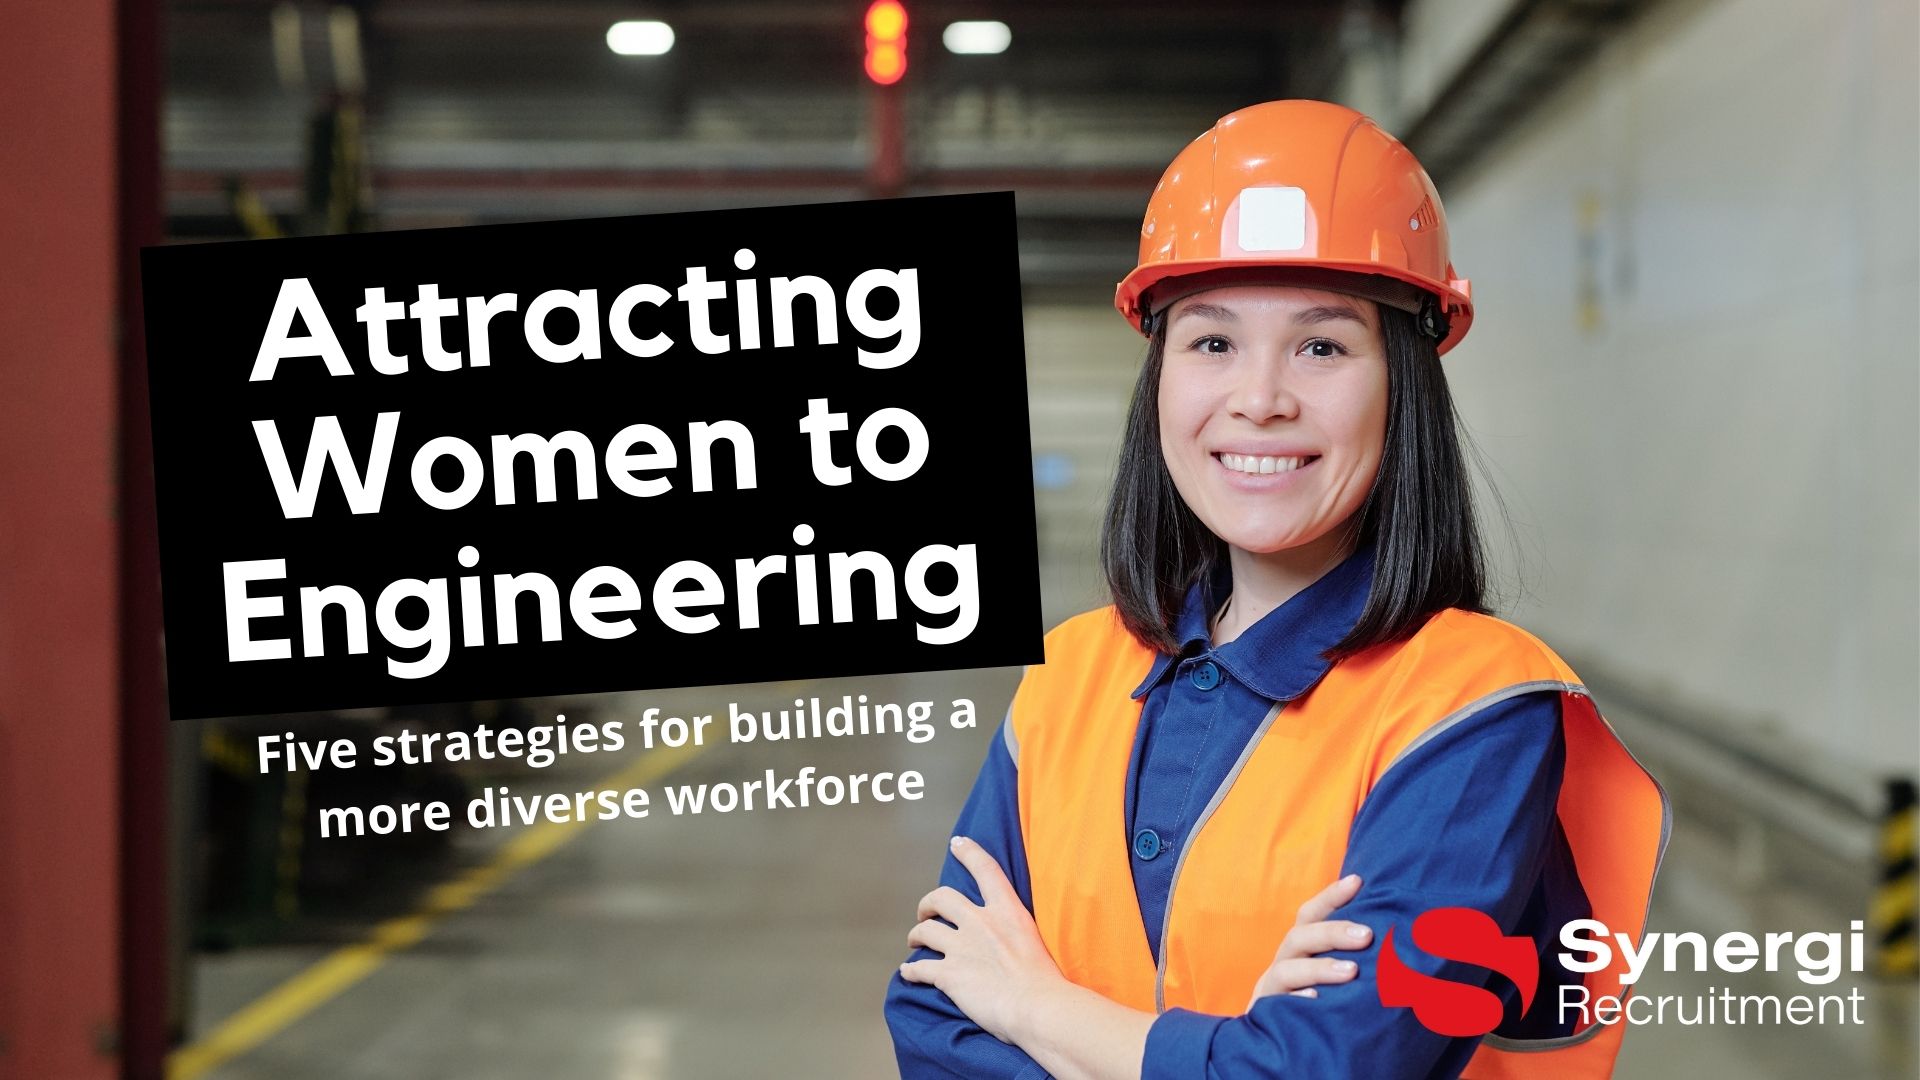 Image: Woman in engineering. Text: Attracting Women to Engineering